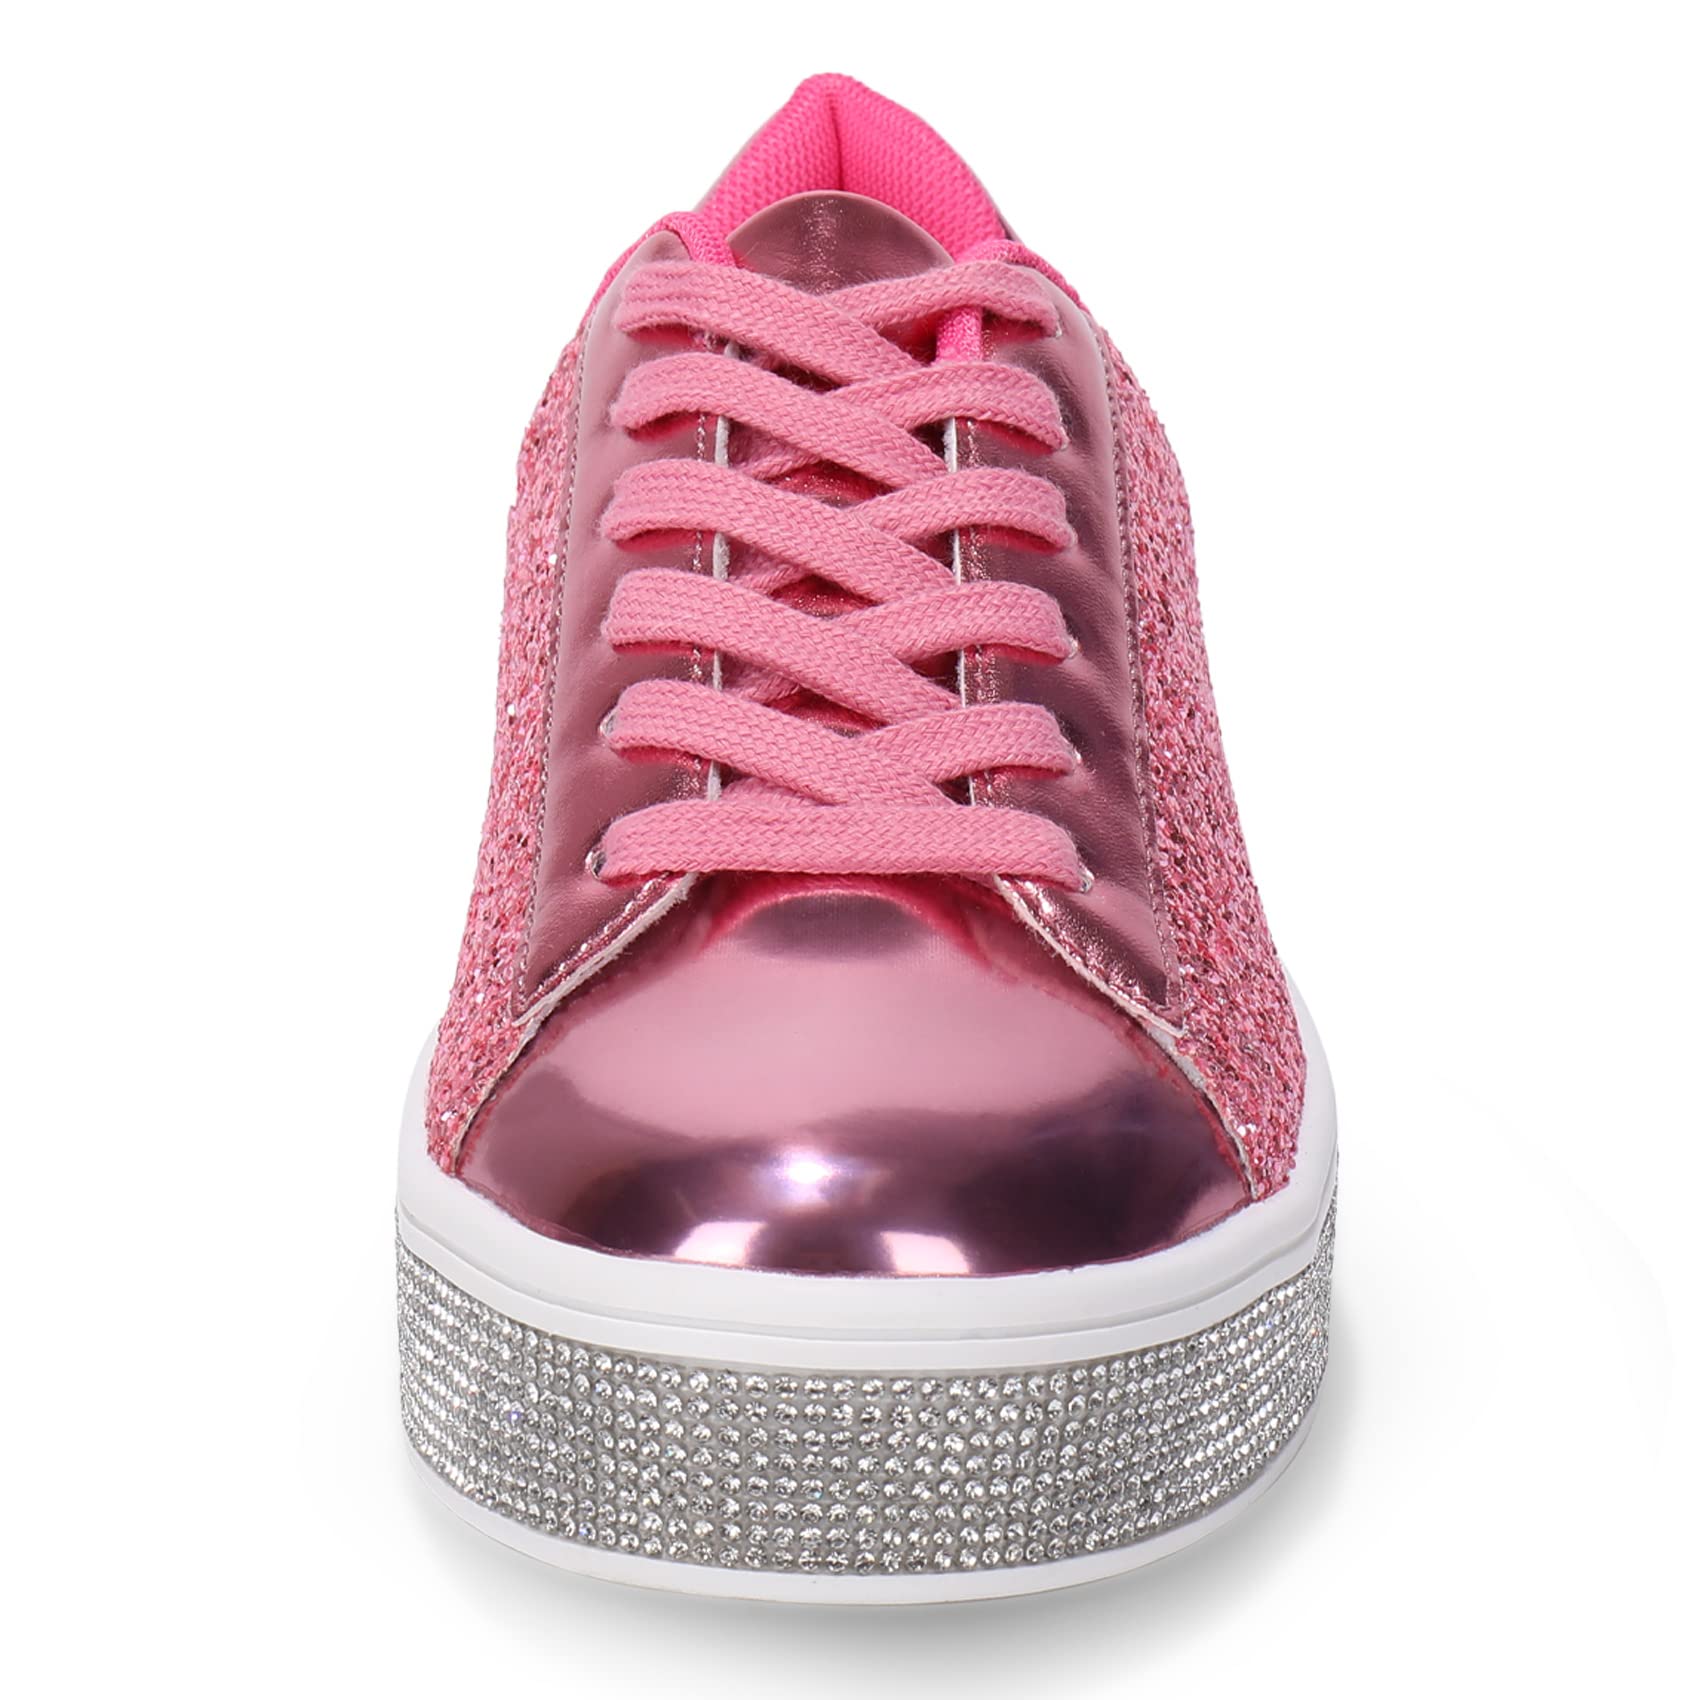 uubaris Women's Glitter Tennis Sneakers Neon Dressy Sparkly Sneakers Rhinestone Bling Wedding Bridal Shoes Shiny Sequin Shoes